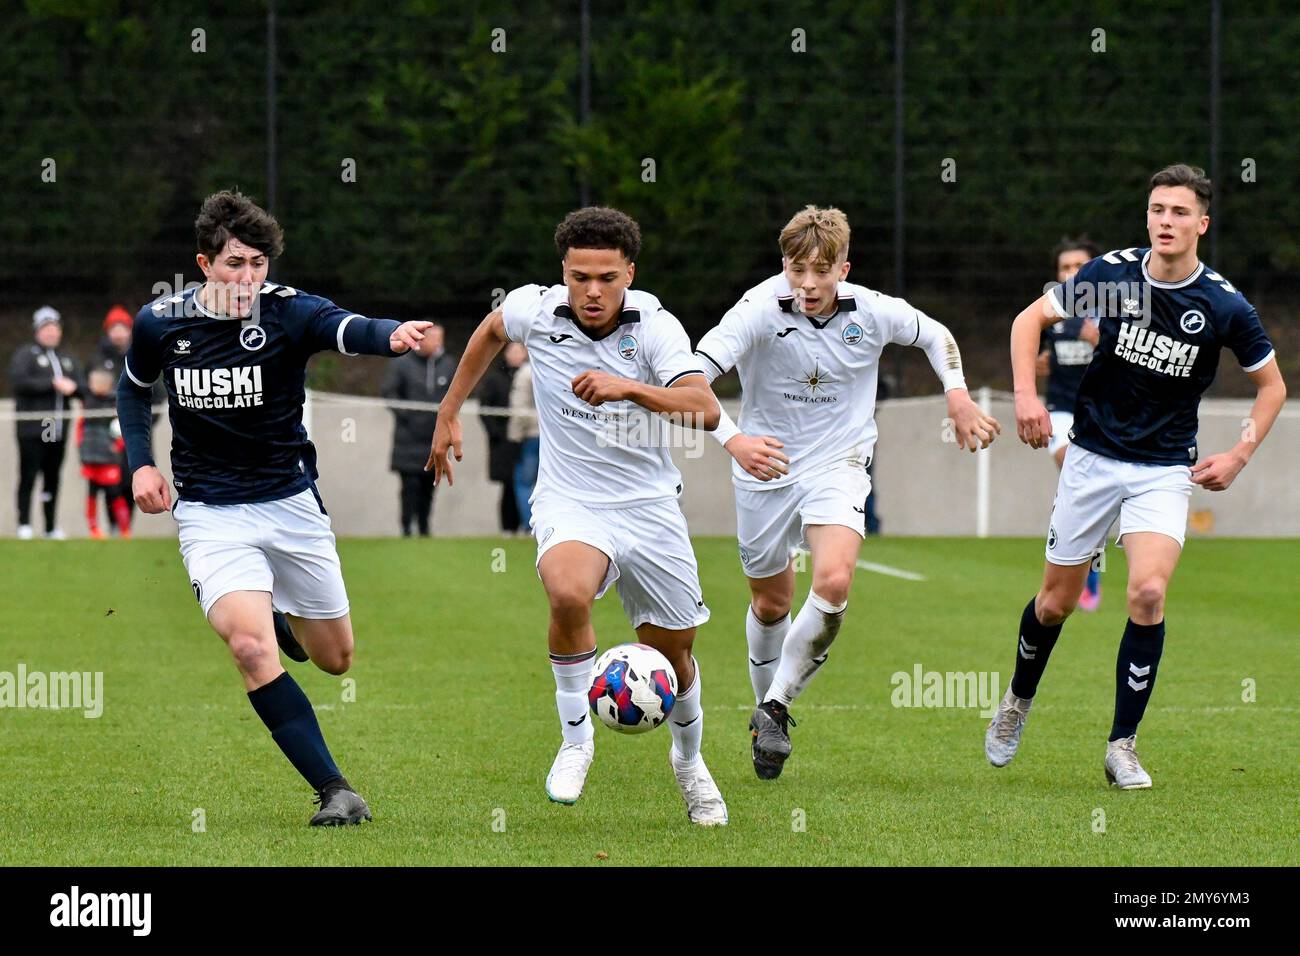 Swansea, Wales. 4 February 2023. Zane Myers of Swansea City under pressure  from Oliver Evans of Millwall during the Professional Development League  game between Swansea City Under 18 and Millwall Under 18